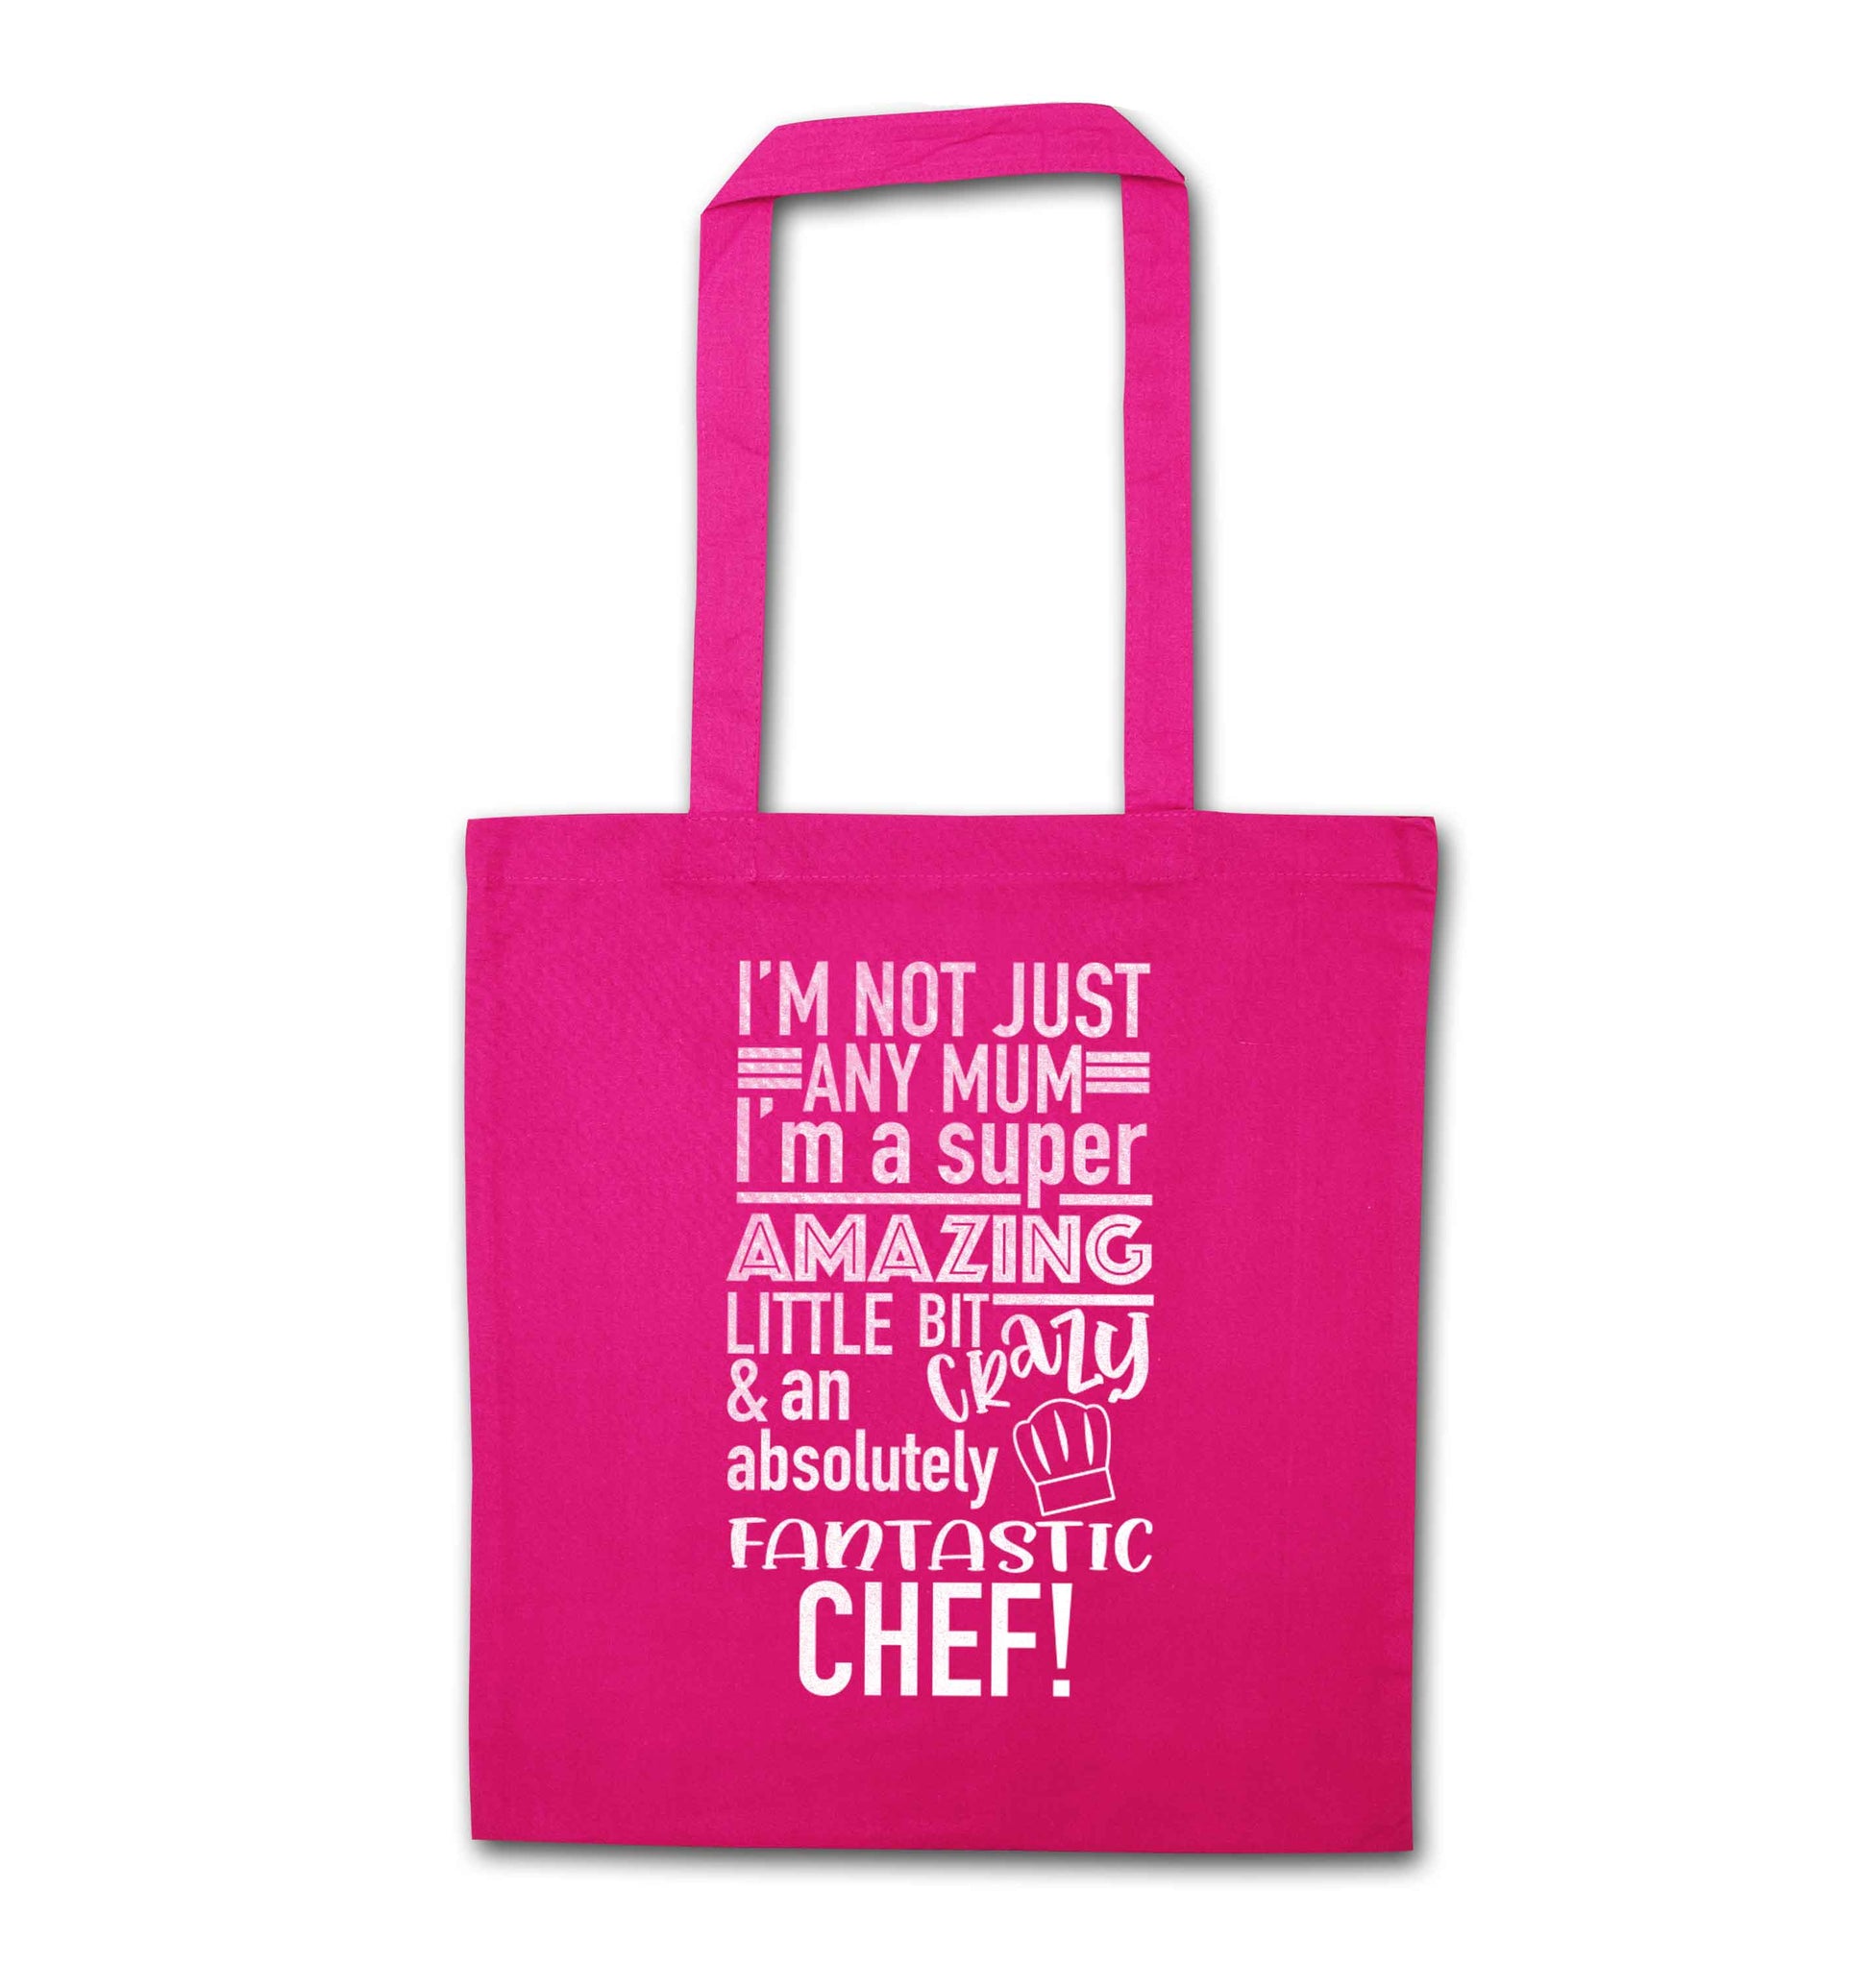 I'm not just any mum I'm a super amazing little bit crazy and an absolutely fantastic chef! pink tote bag